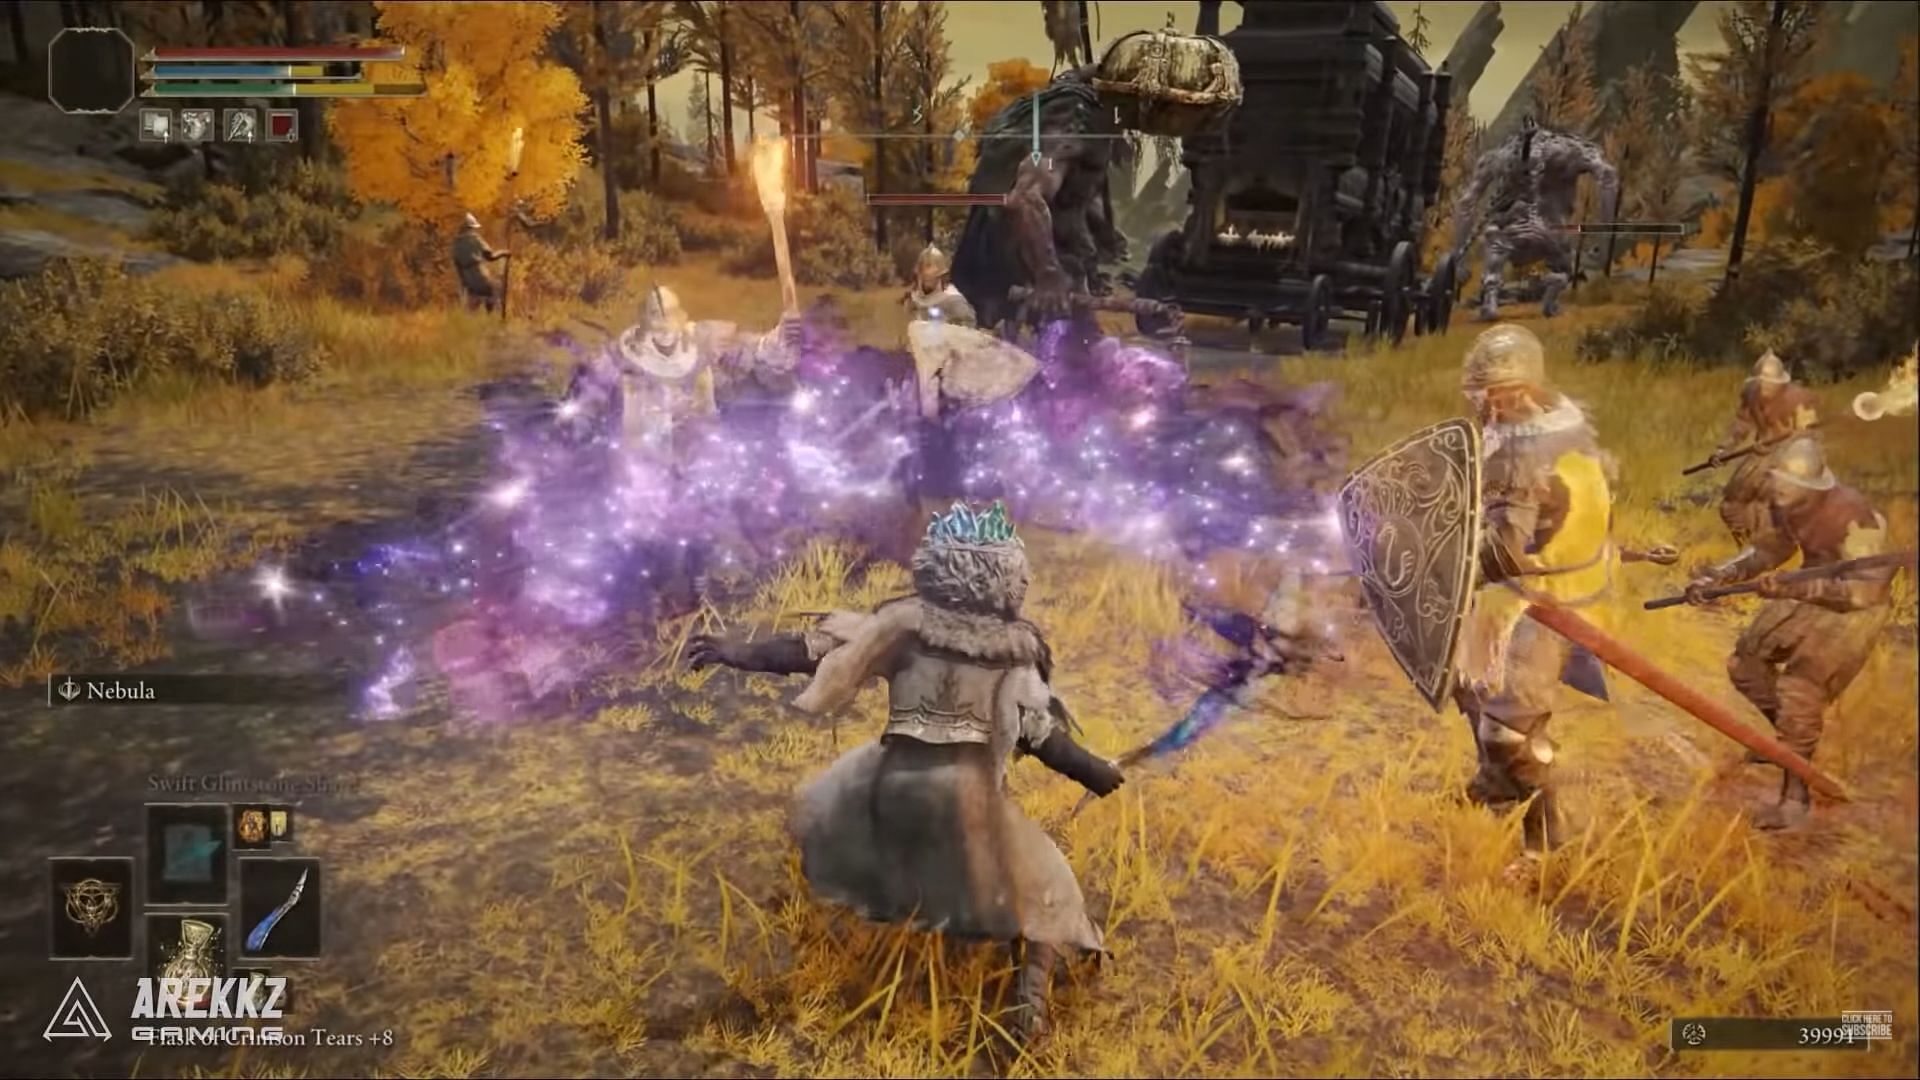 Wing of Astel can demolish every boss in Elden Ring in the blink of an eye (Image via Arekkz Gaming/YouTube)